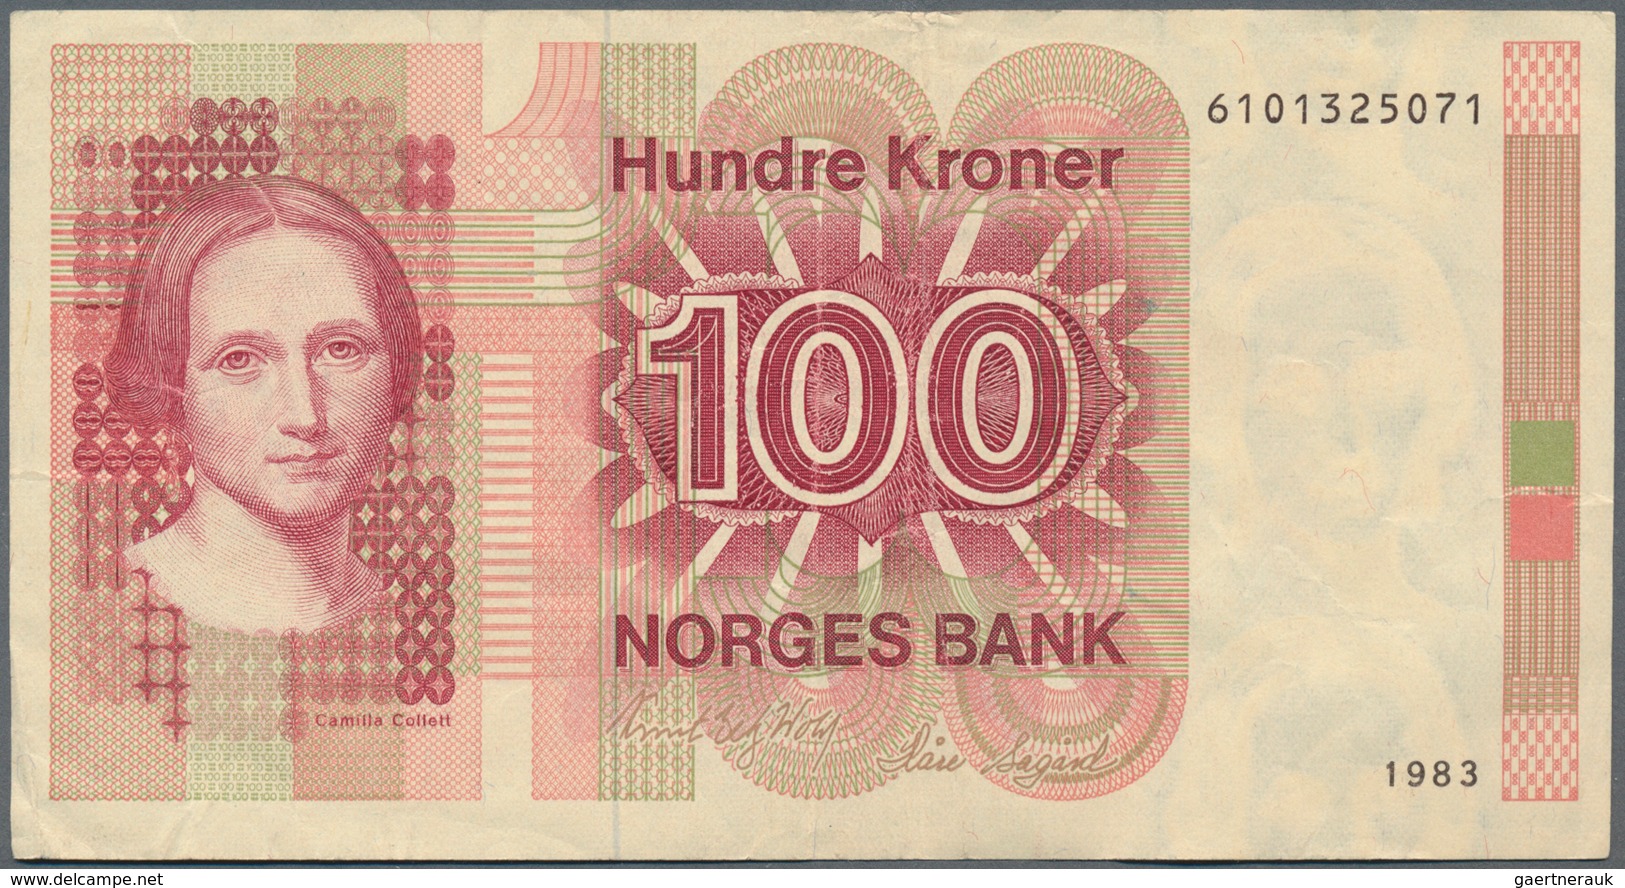 Alle Welt: 2 collectors books with 167 banknotes Germany and from all over the world, for example GD